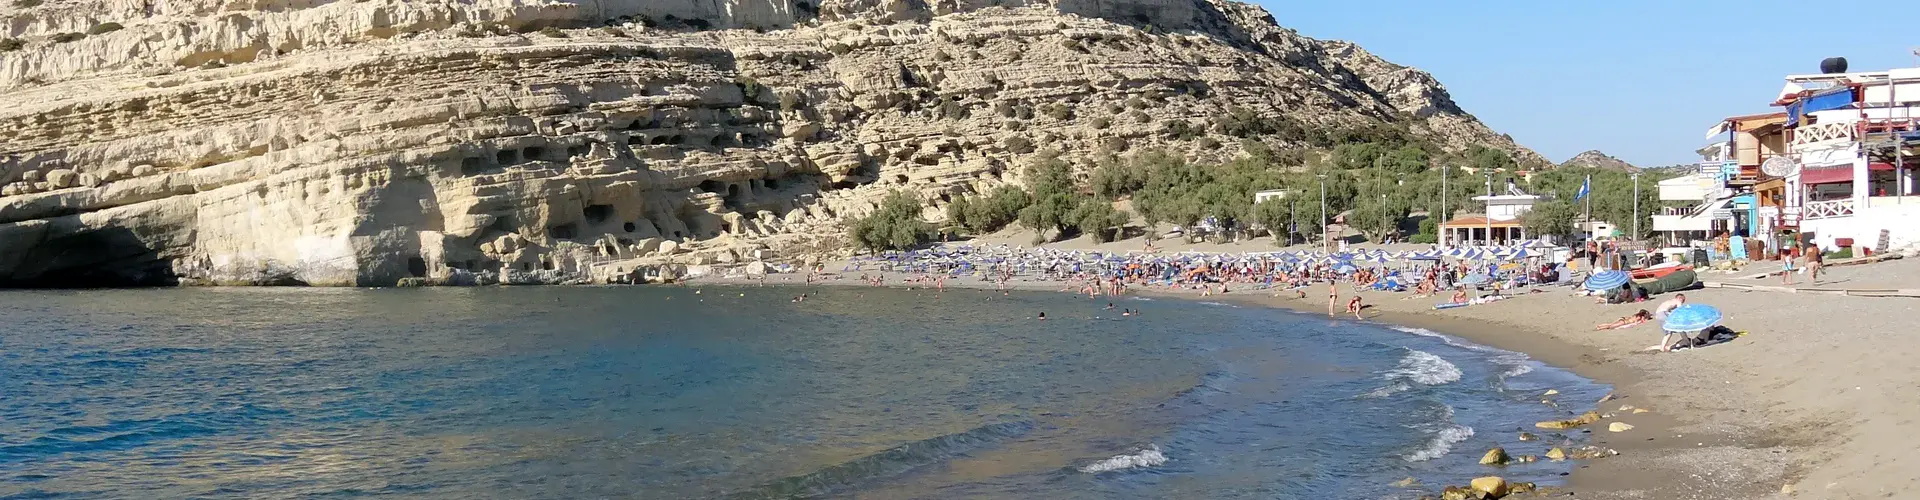 Beaches in southern Crete could be affected by an Eastern Mediterranean tsunami (Credit: Olaf Tausch)